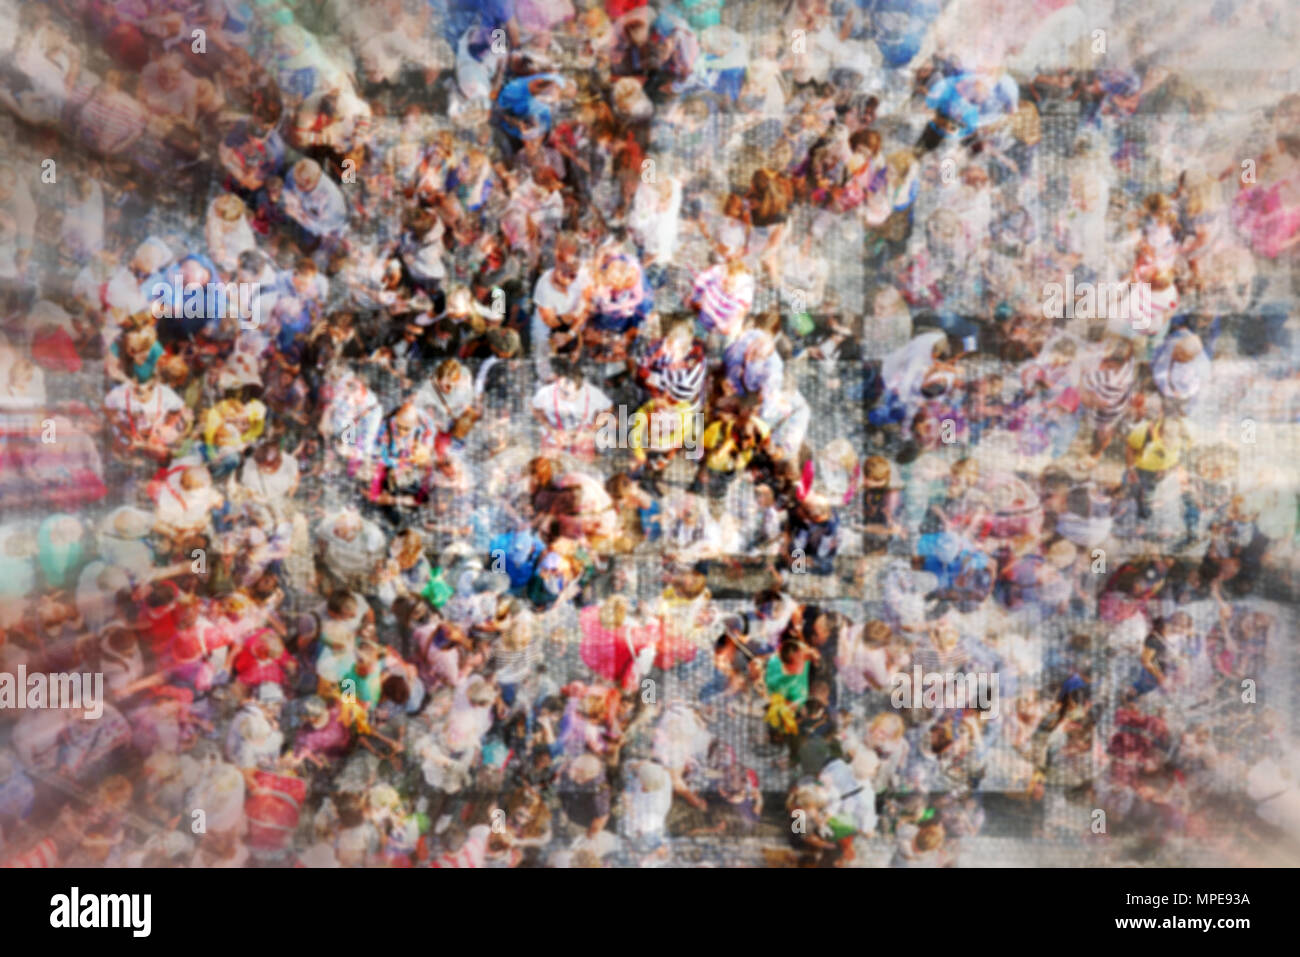 General data protection regulation GDPR concept. Blurry background for web site design, defocus crowd of people on city street, top view Stock Photo